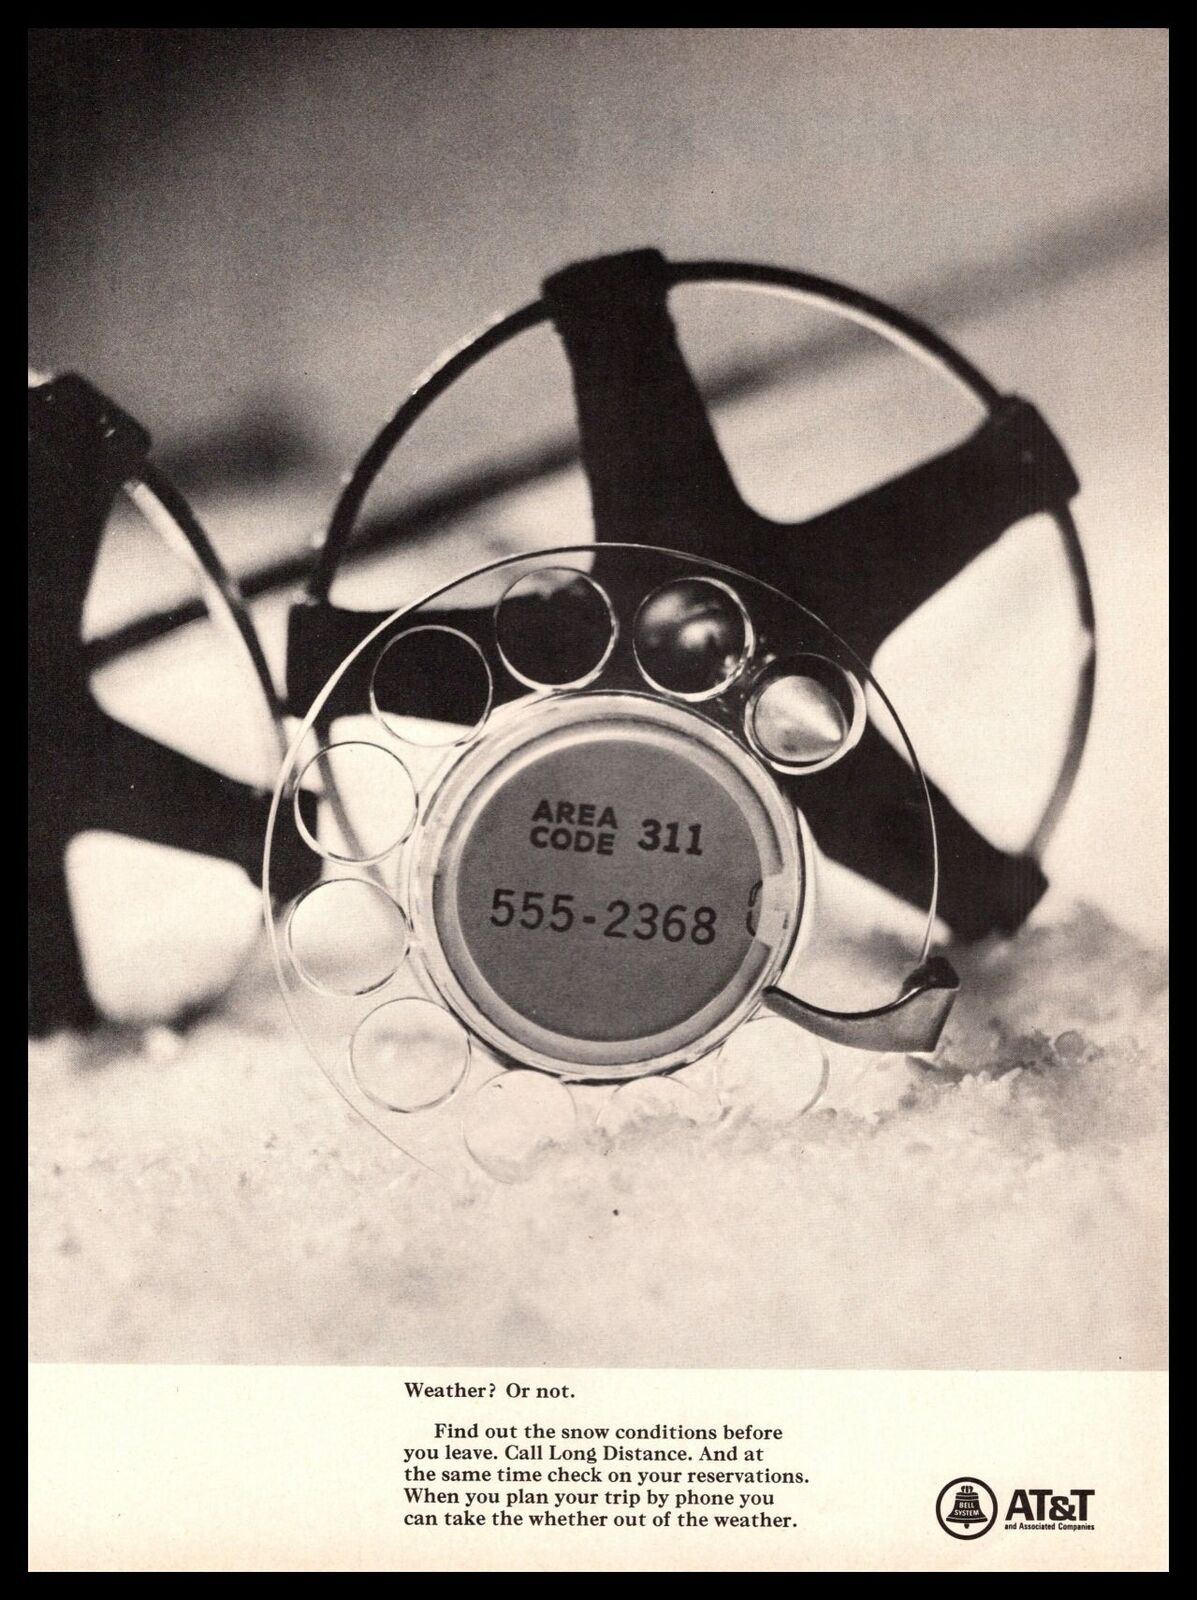 1968 AT&T Long Distance Area Code 311 Rotary Telephone Dial Snow Ski Print Ad